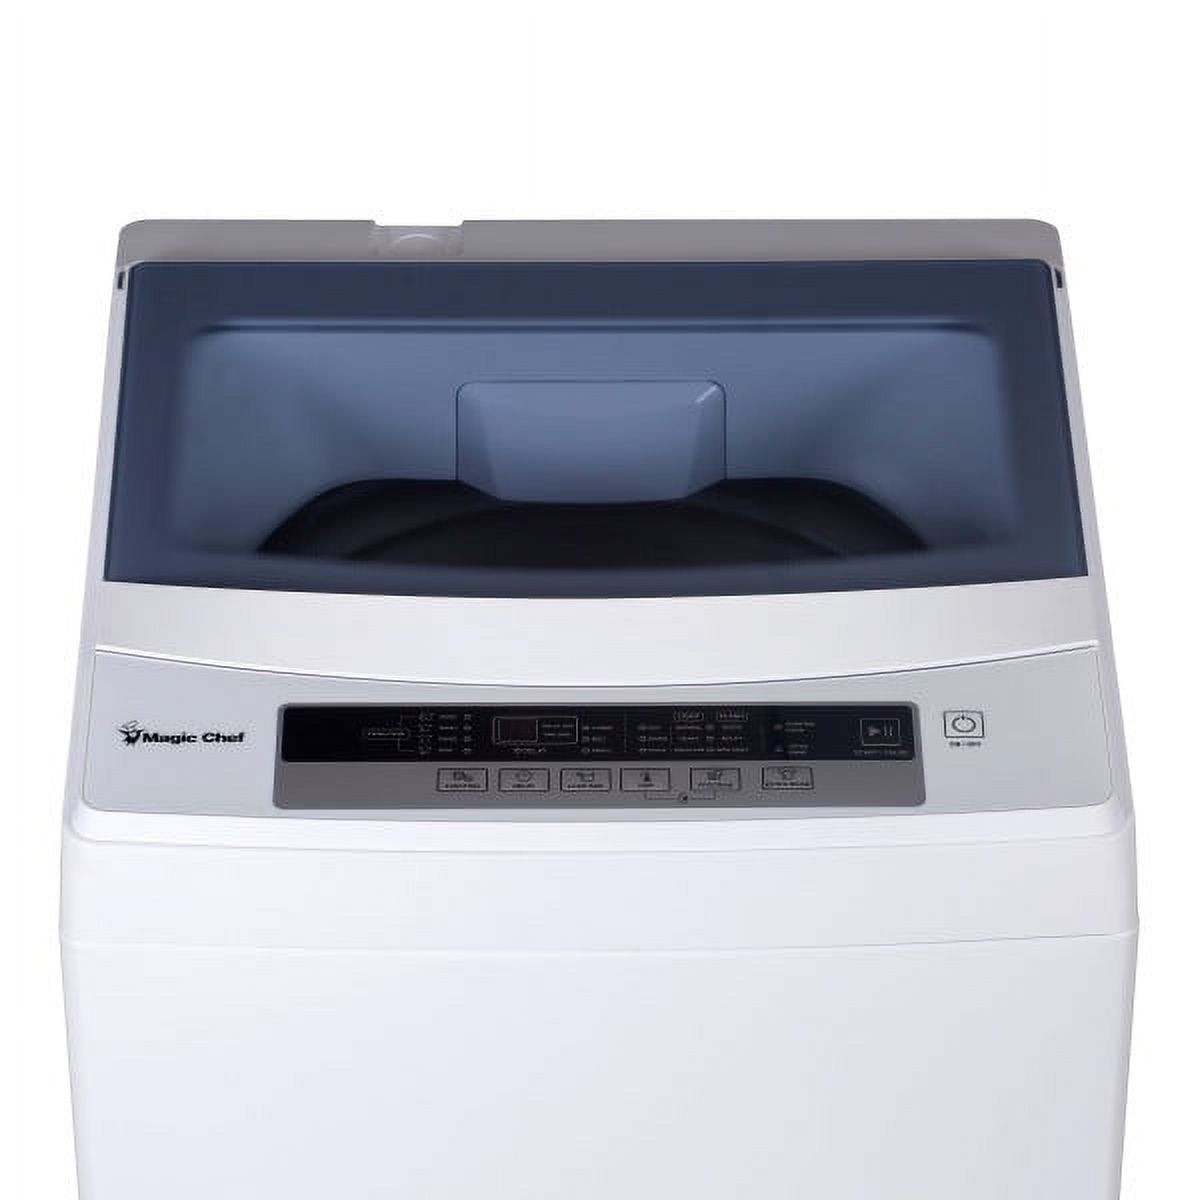 Magic Chef 1.6 cu. ft. Compact Portable Top-Load Washer, White - image 2 of 8